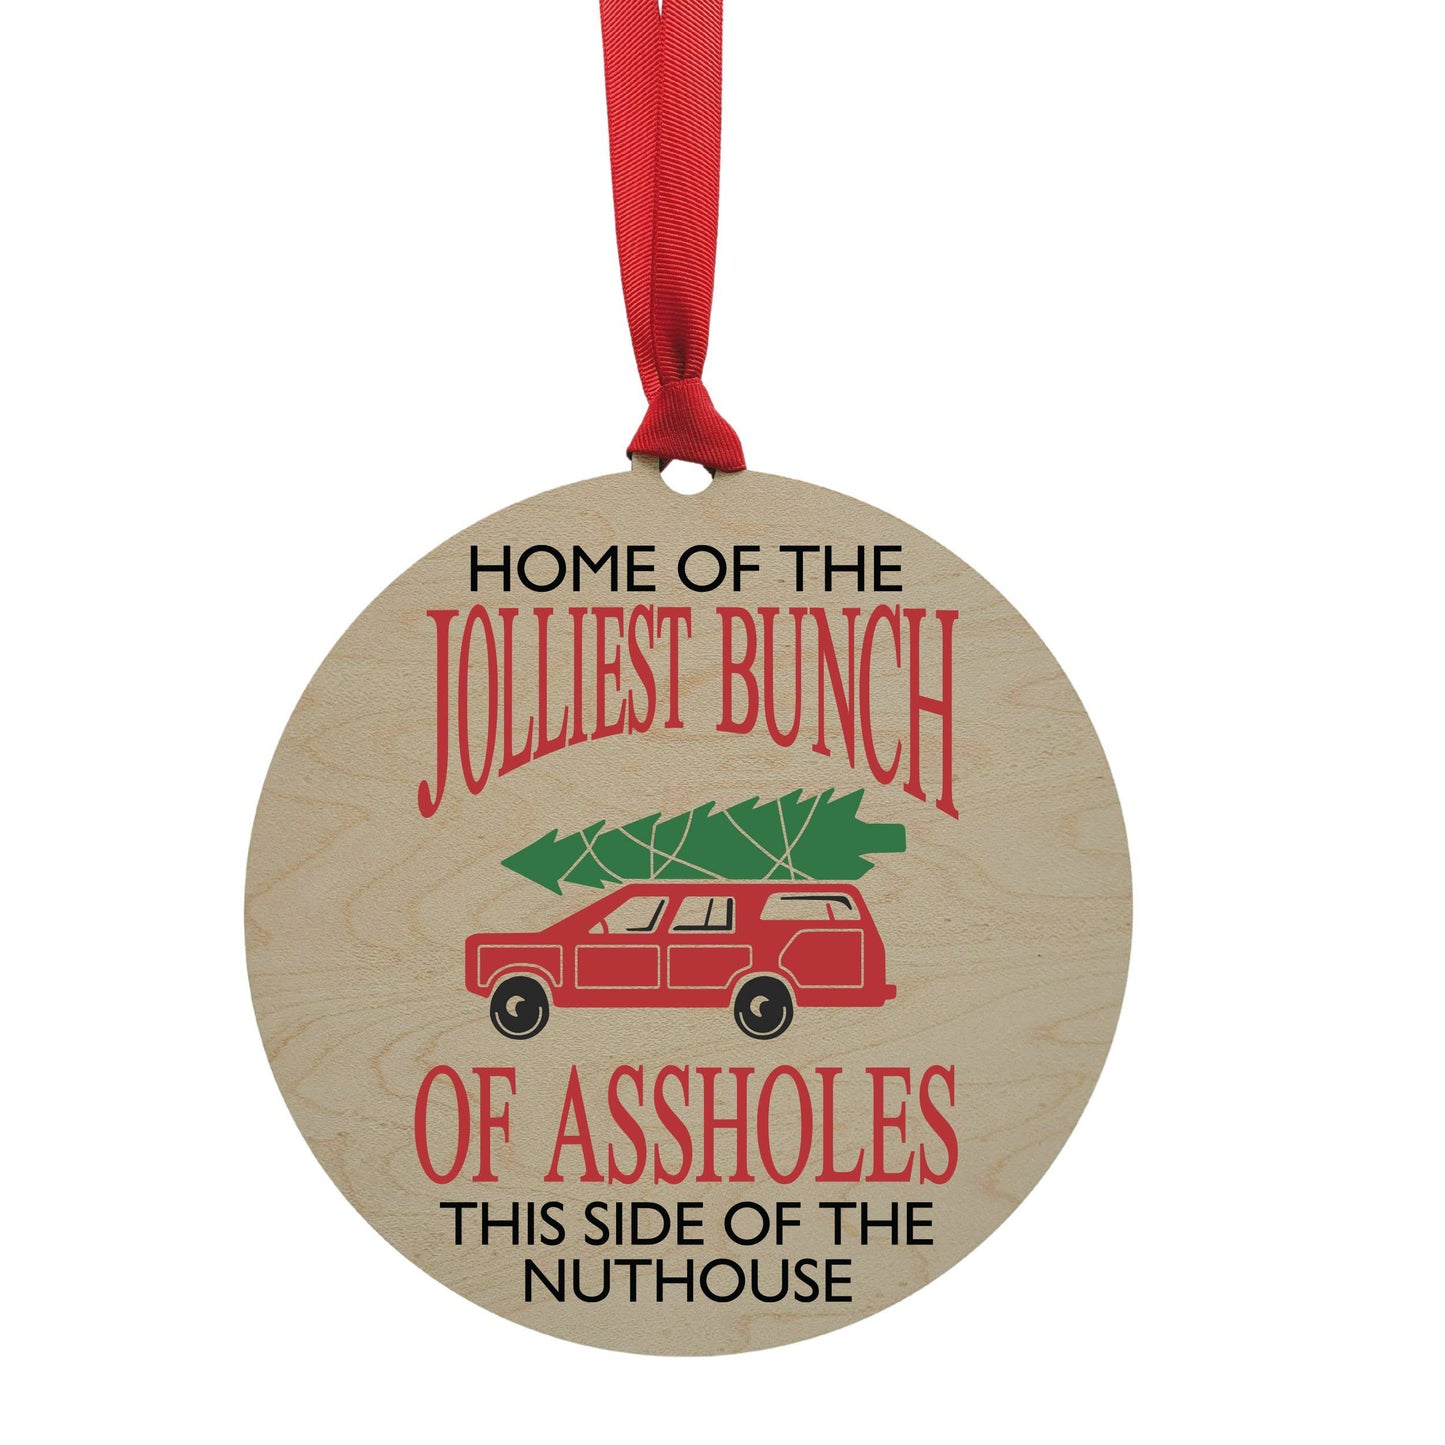 Home Of The Jolliest Wreath Ornaments Or Mantle Ornament